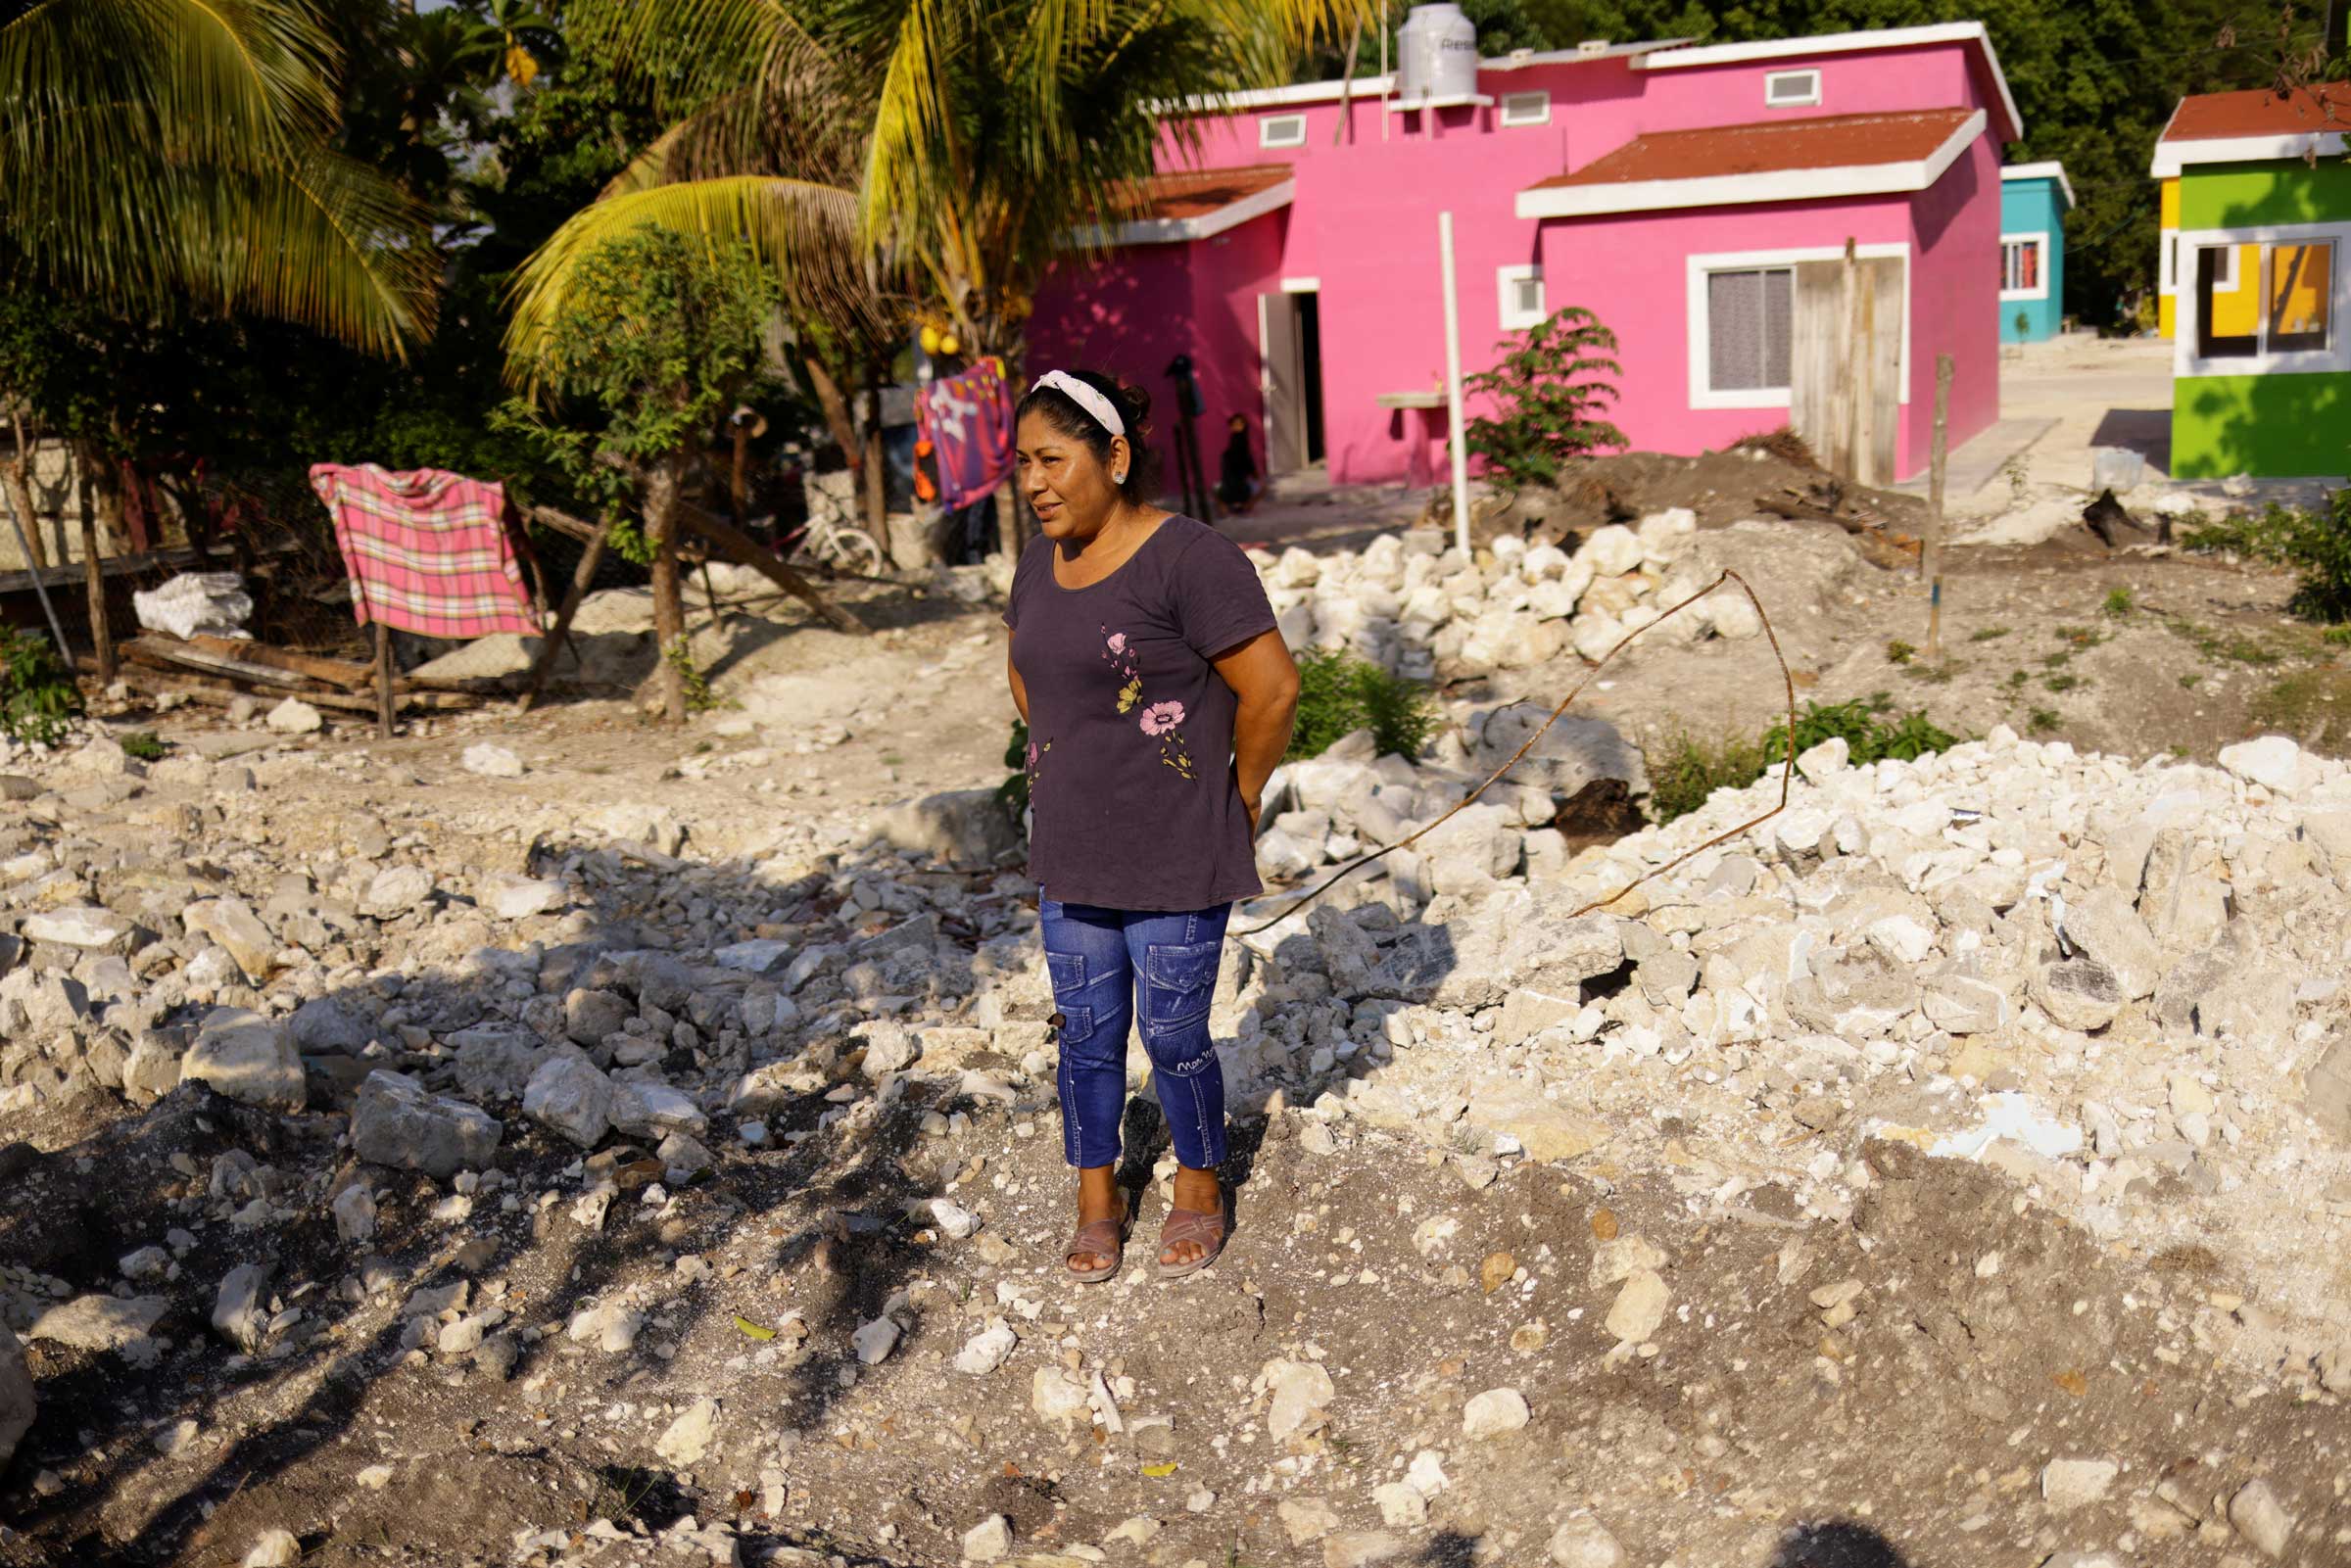 Rosario Jimenez stands in front of her new house after being relocated due to the construction of section 1 of the new Mayan Train route, in the town of Haro, Mexico, on May 12, 2022. Jimenez says she was upset when her house was demolished, but is happy she has been relocated into a newly built home further back from the train tracks. (Jose Luis Gonzalez—Reuters)